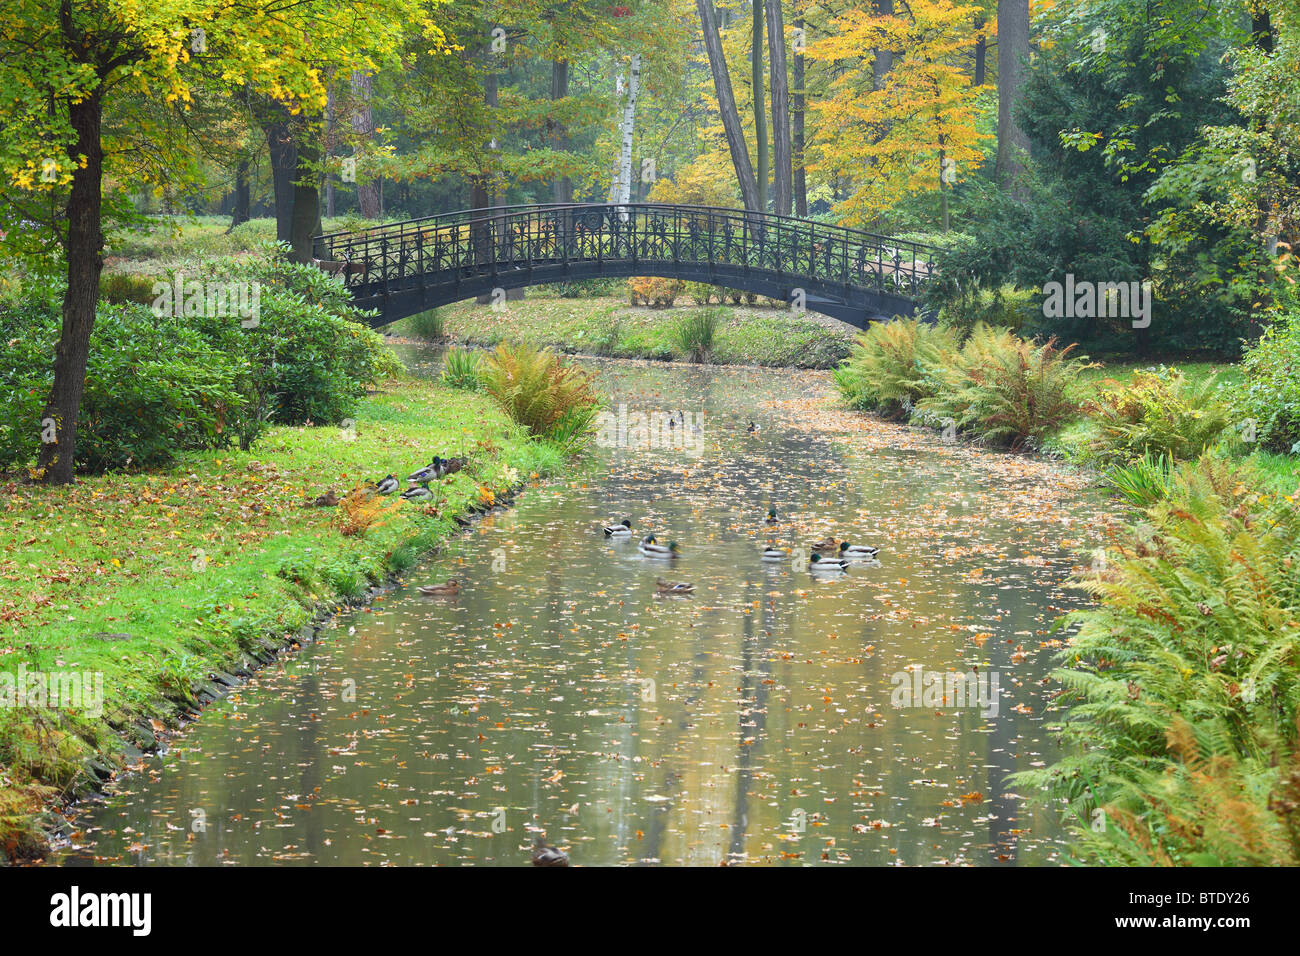 Quiet tranquill calm water and autumn fall colors Stock Photo